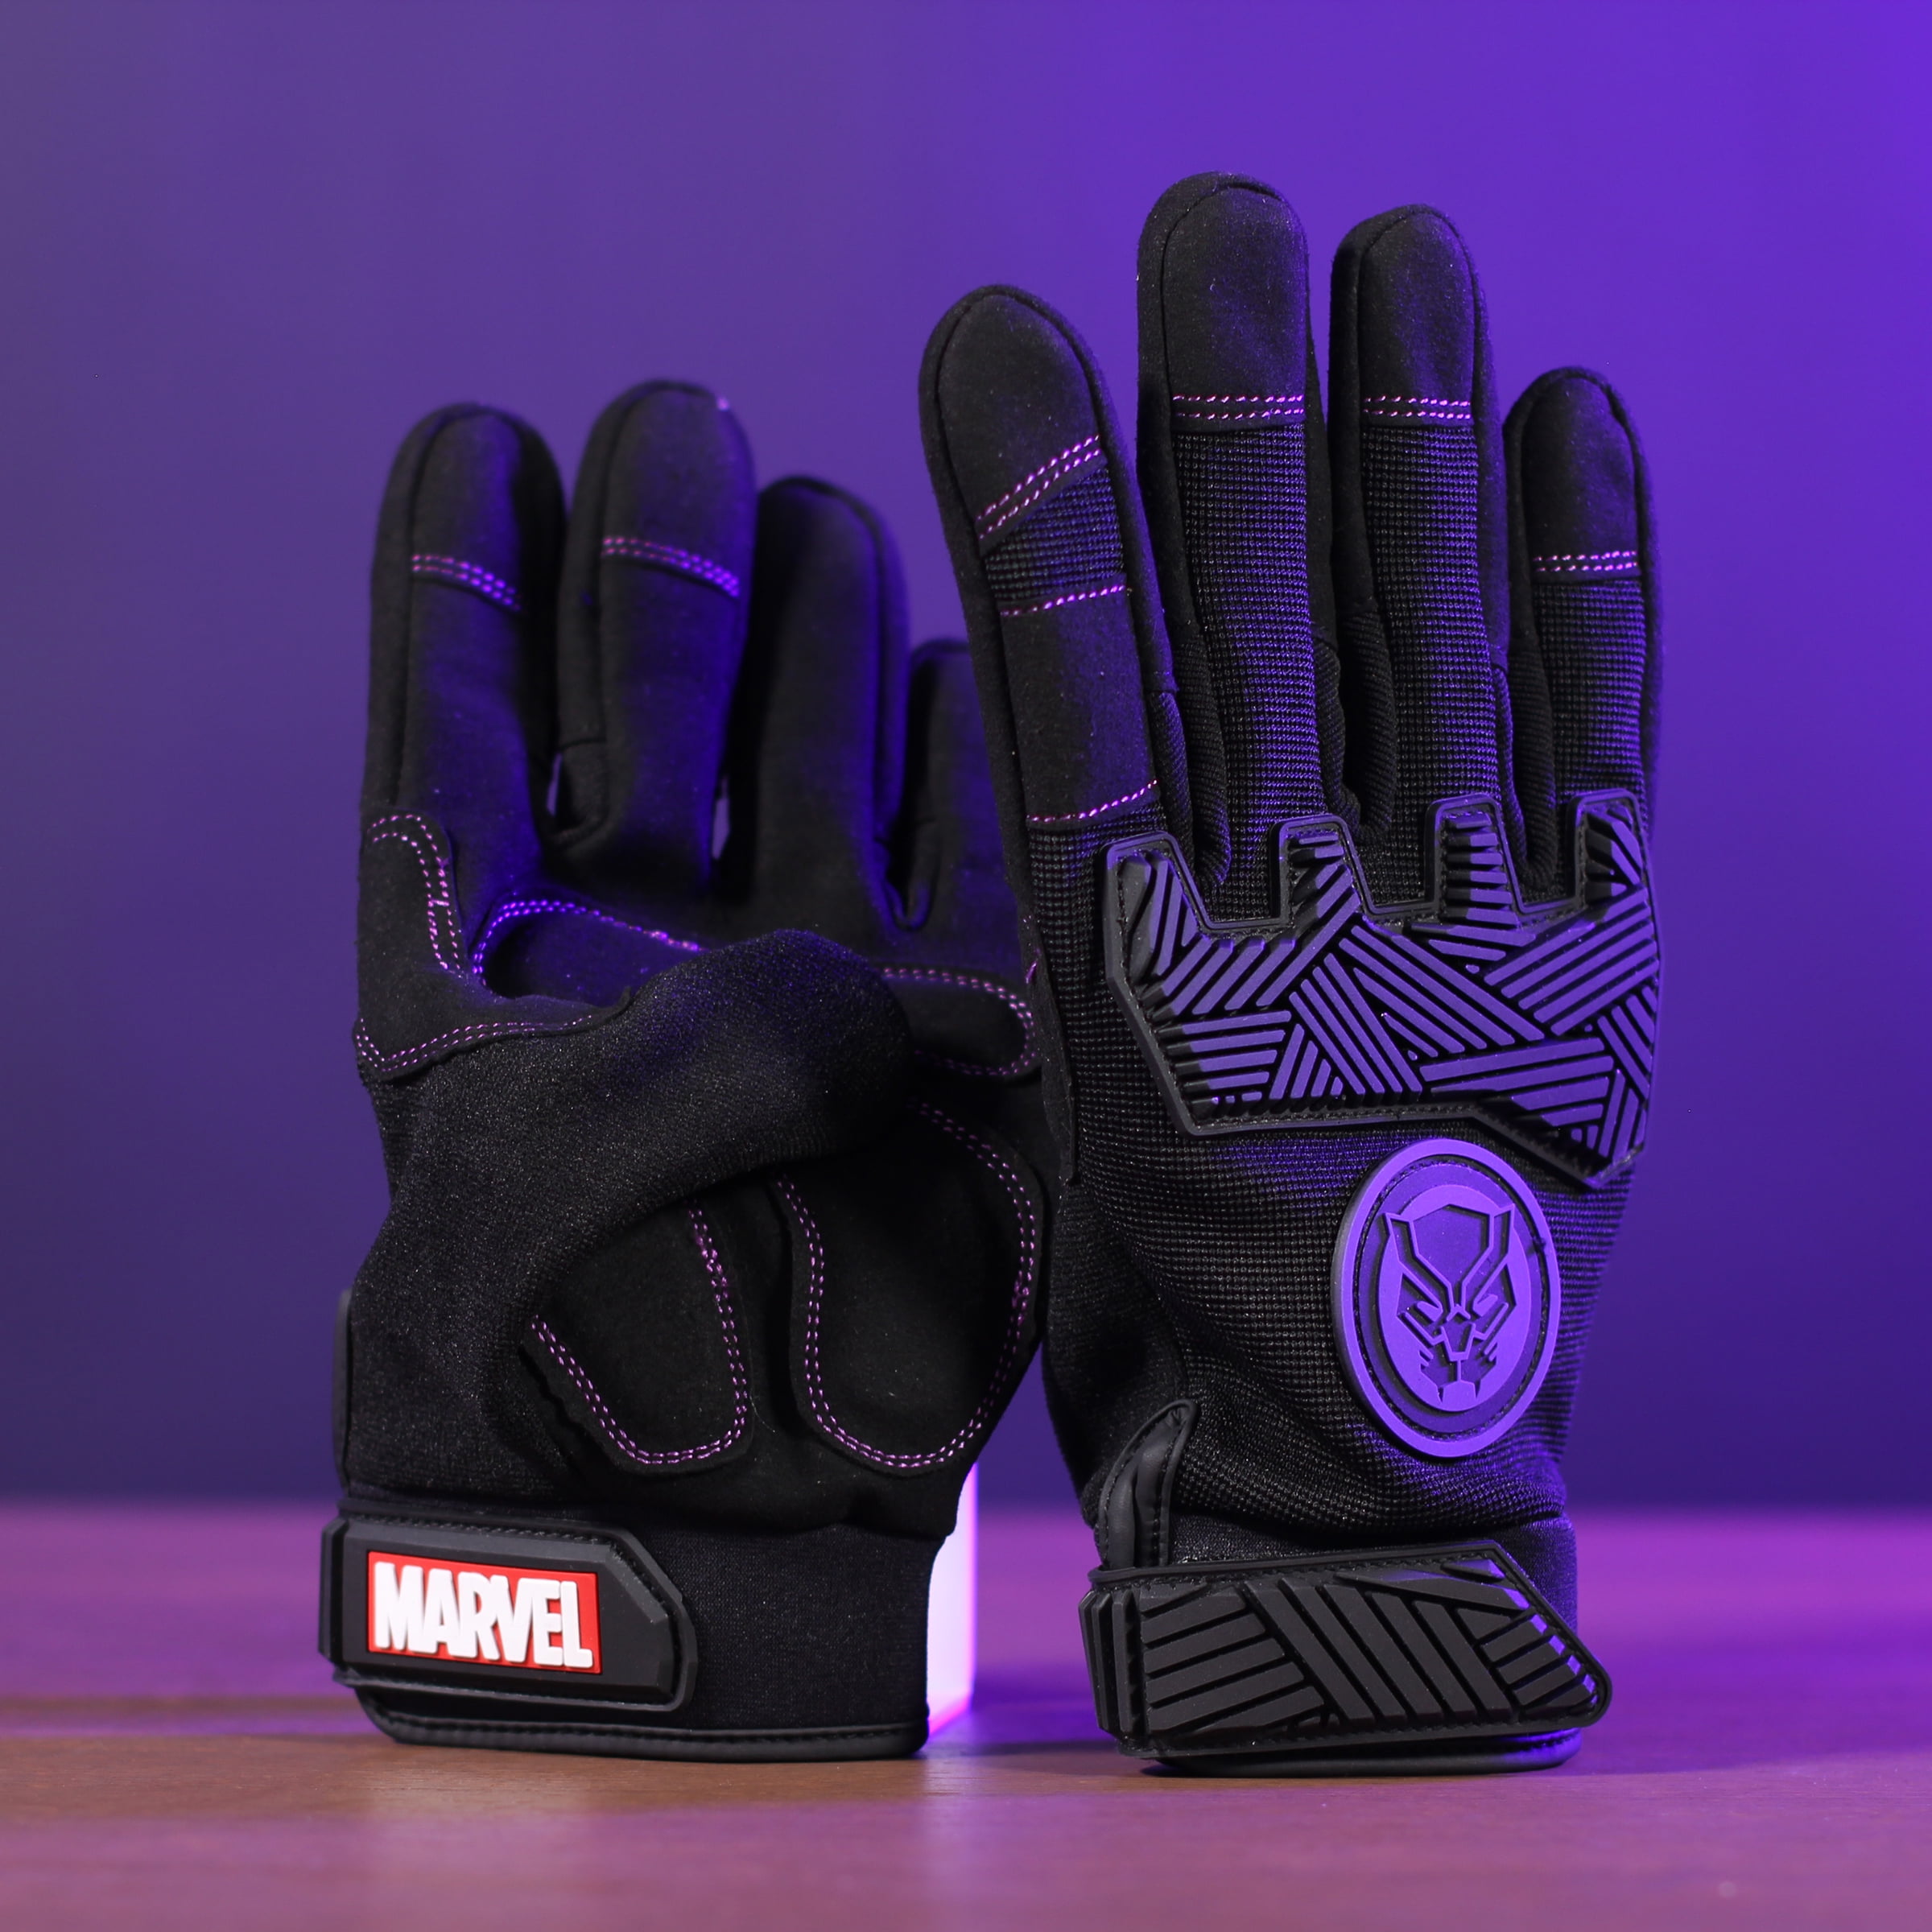 Marvel Black Panther Padded Touchscreen Work Gloves Size Small/Medium